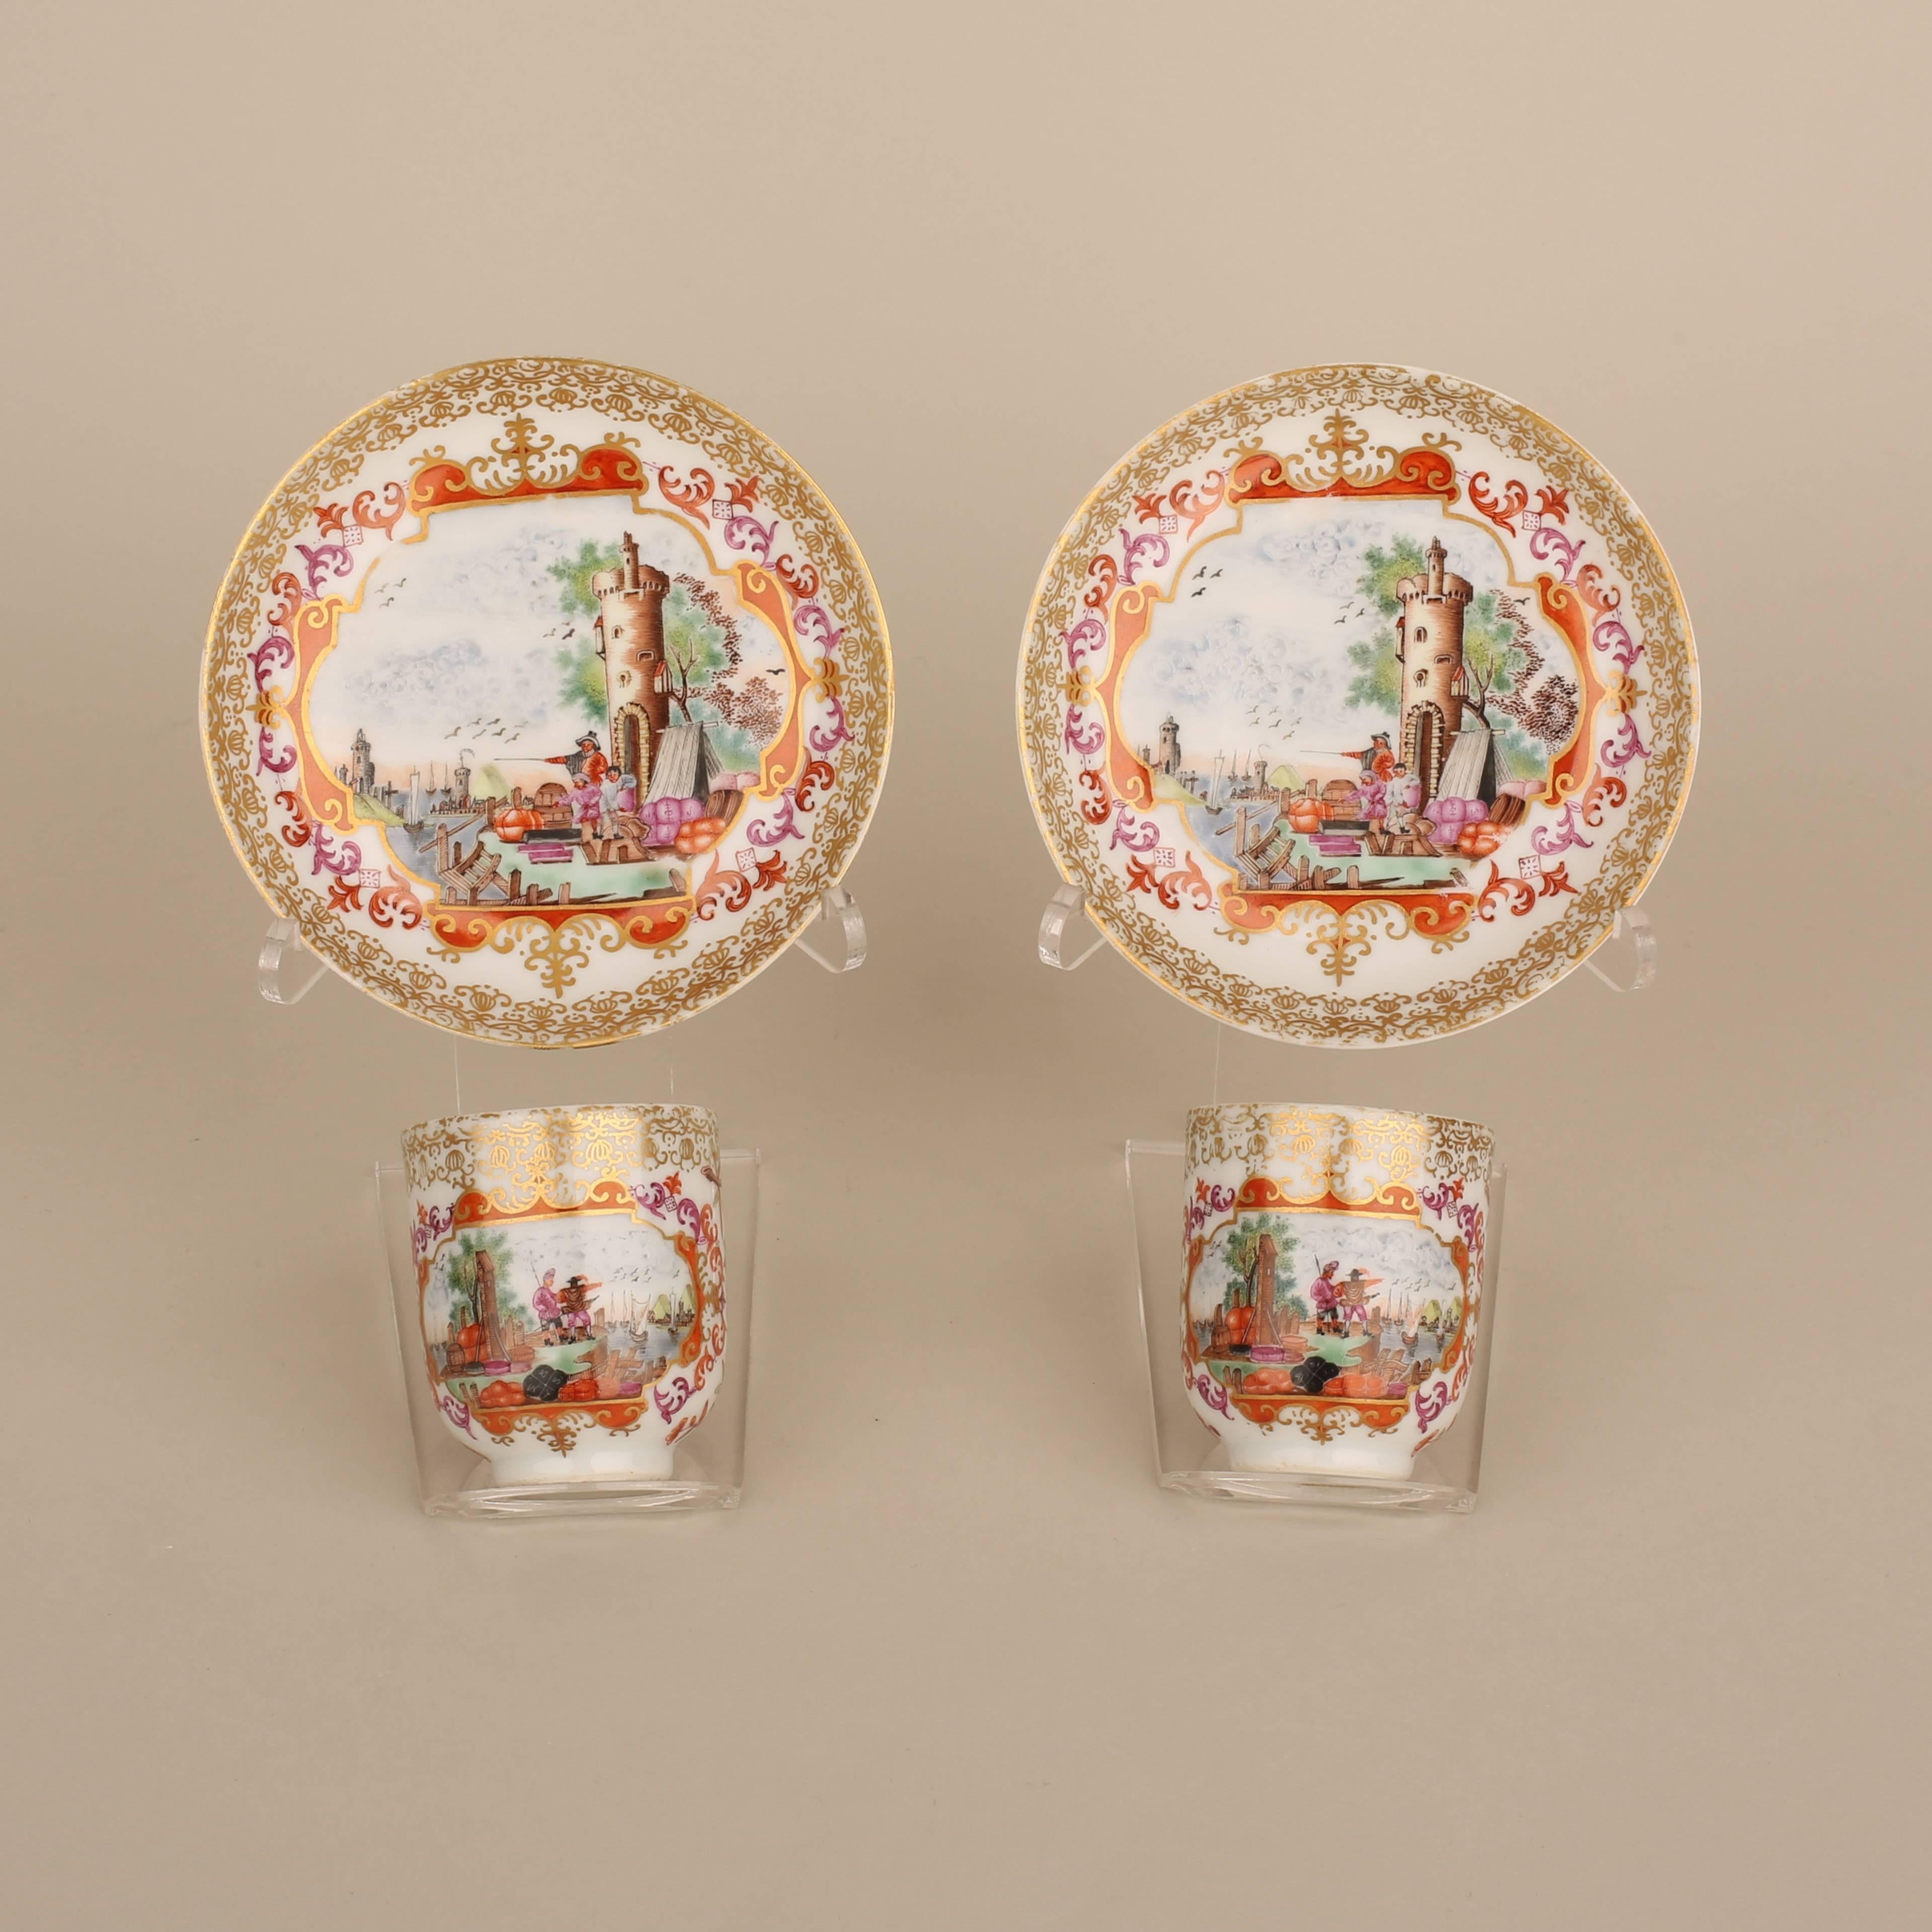 A pair of Chinese porcelain eggshell European subject cups and saucers painted in enamels with a central shipping scene with three figures next to a watch tower overlooking a port, enclosed by a decorative orange, pink and gilt border, further